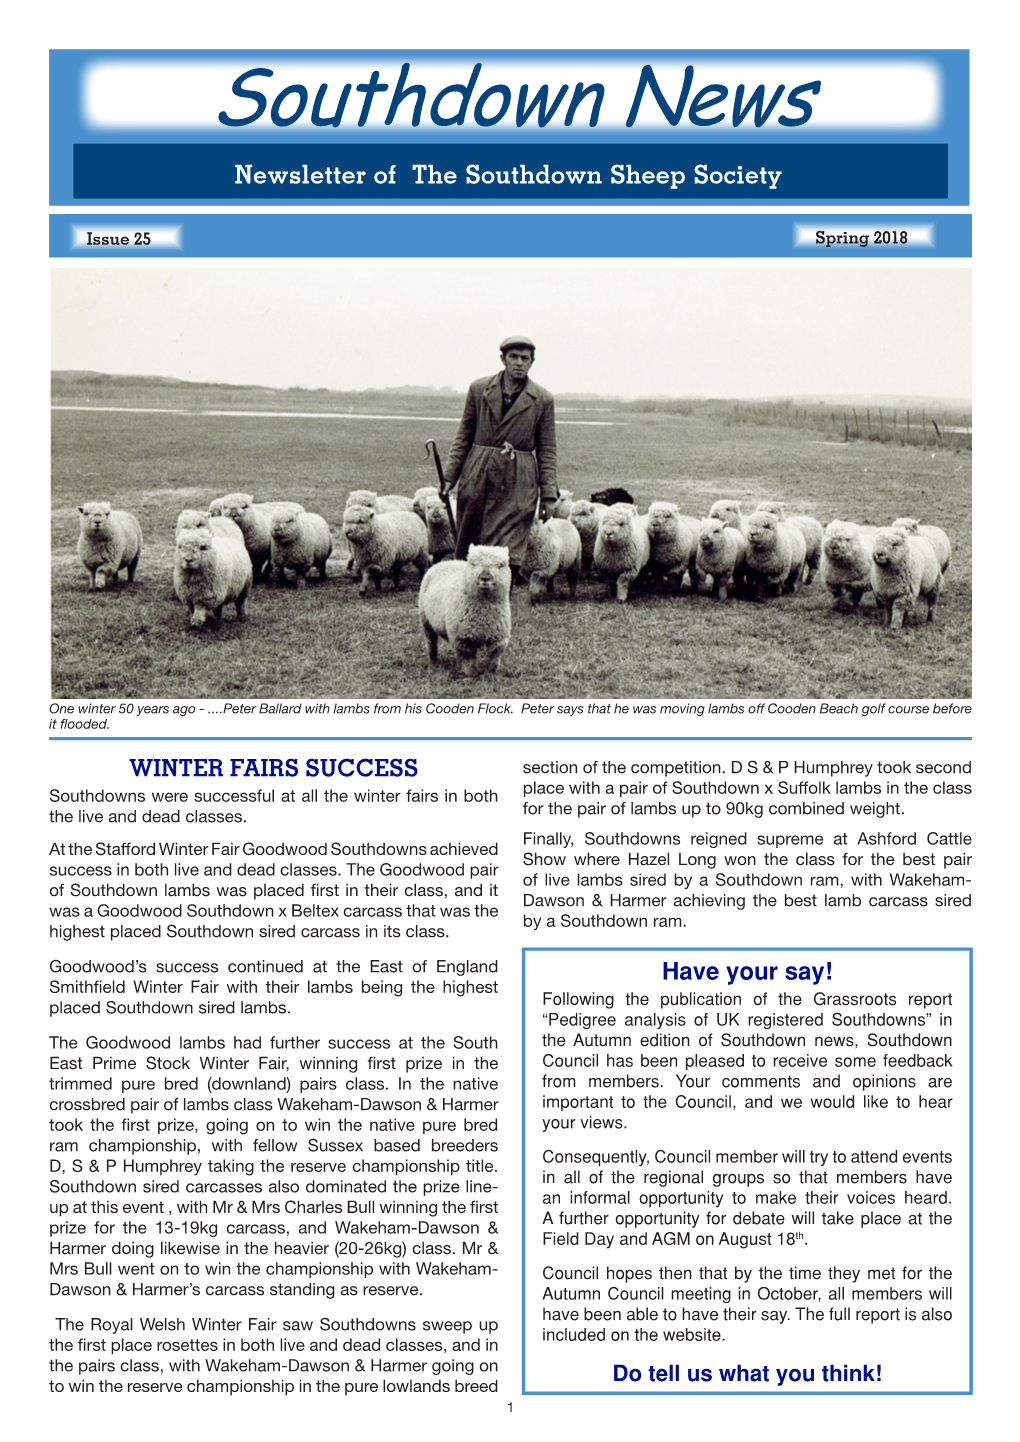 Southdown News Newsletter of the Southdown Sheep Society